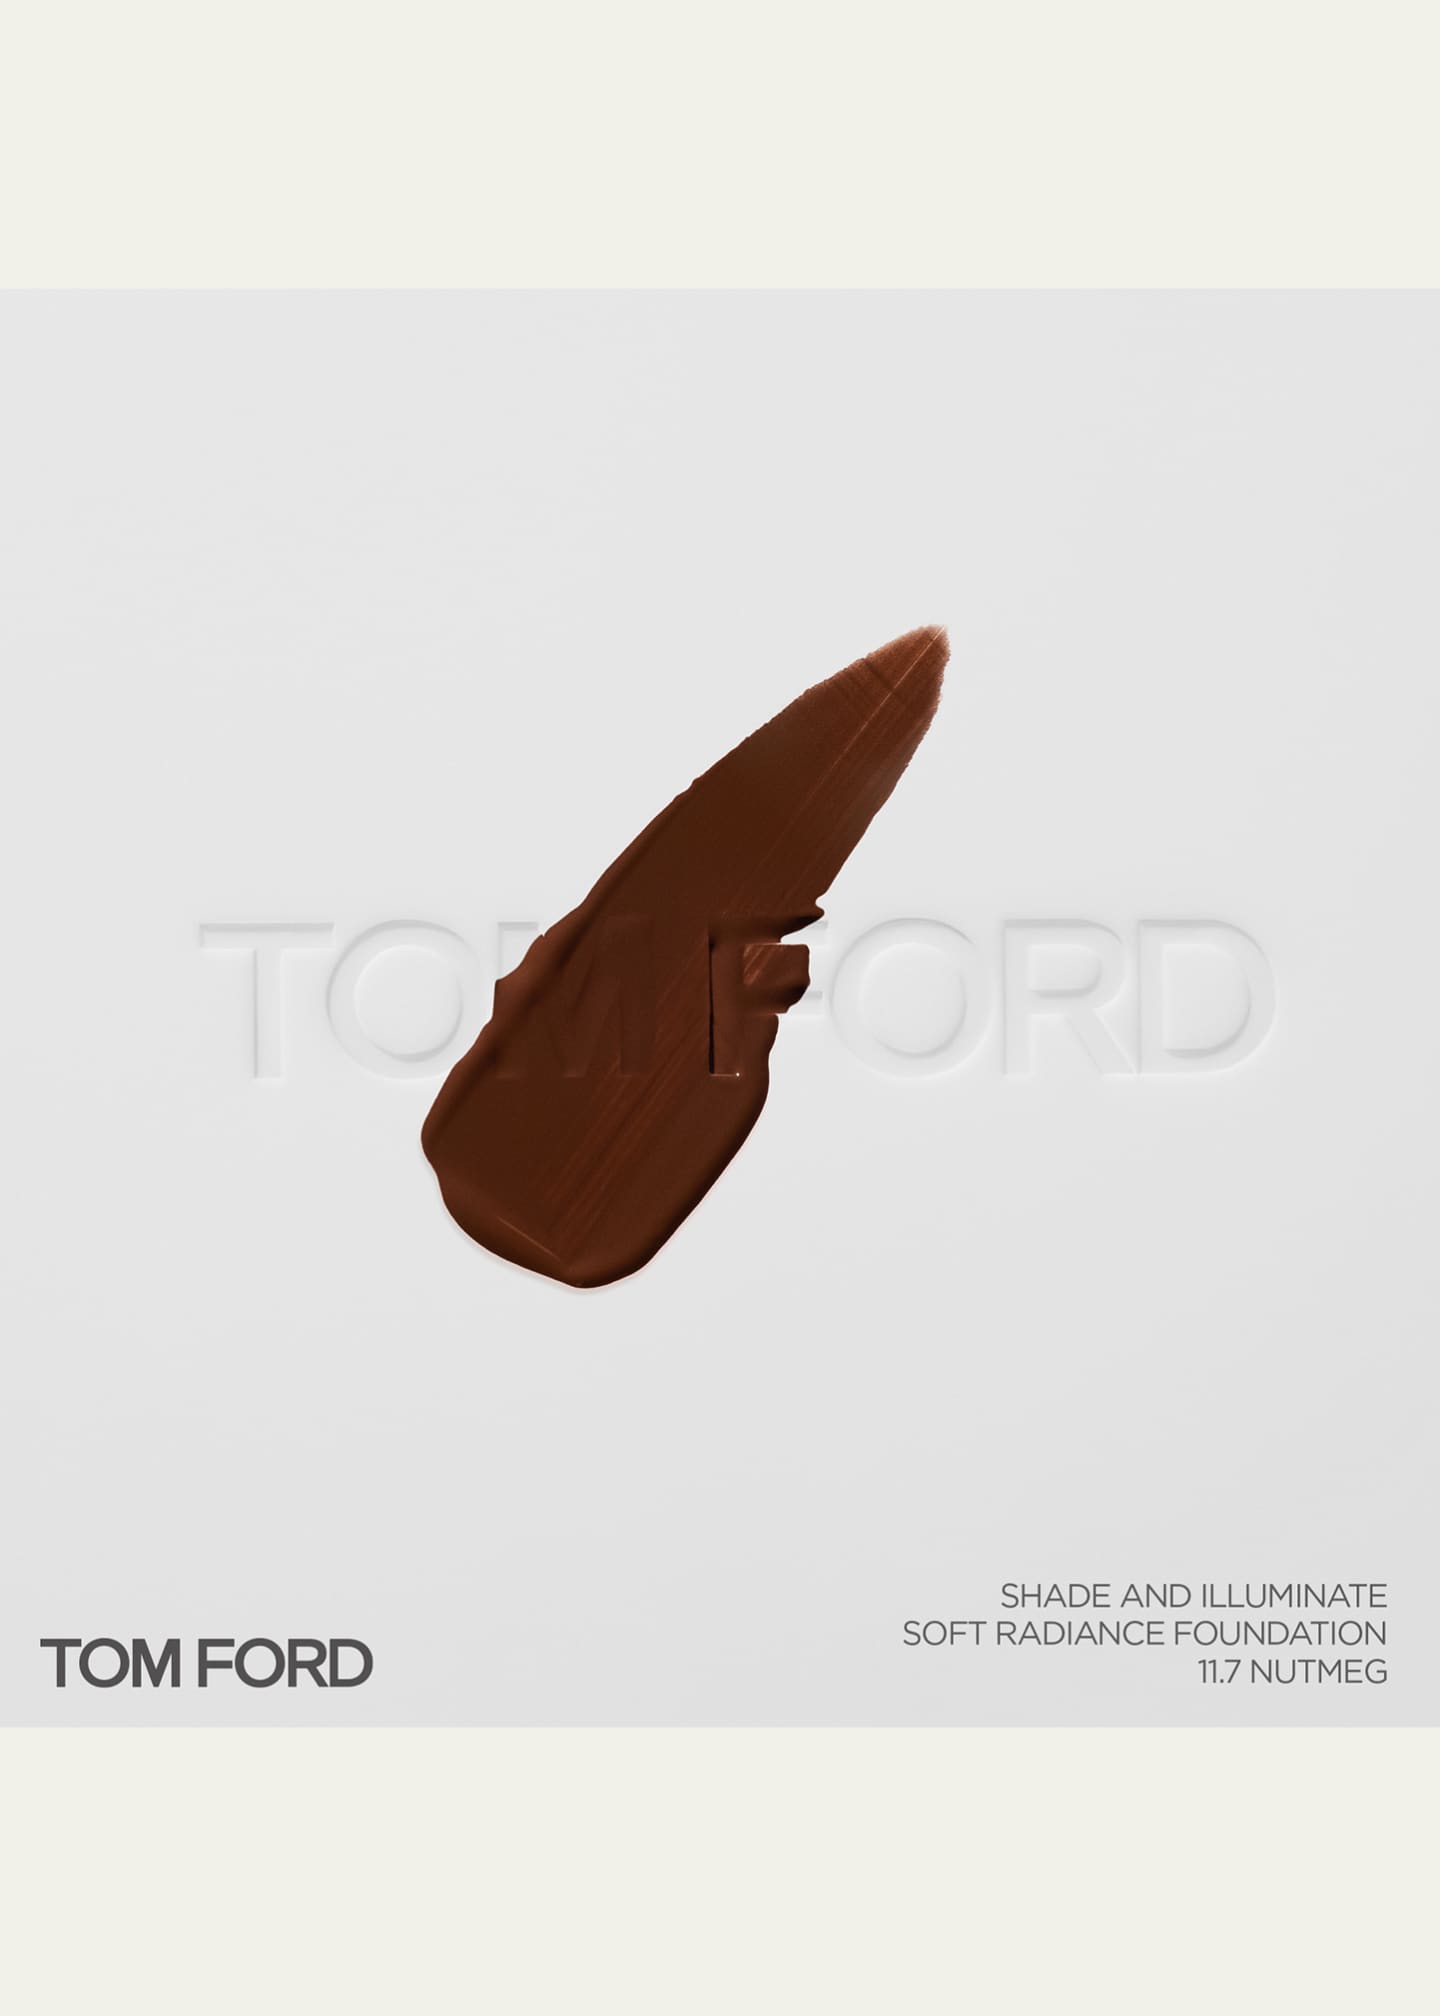 Review  Tom Ford Shade and Illuminate Soft Radiance Foundation